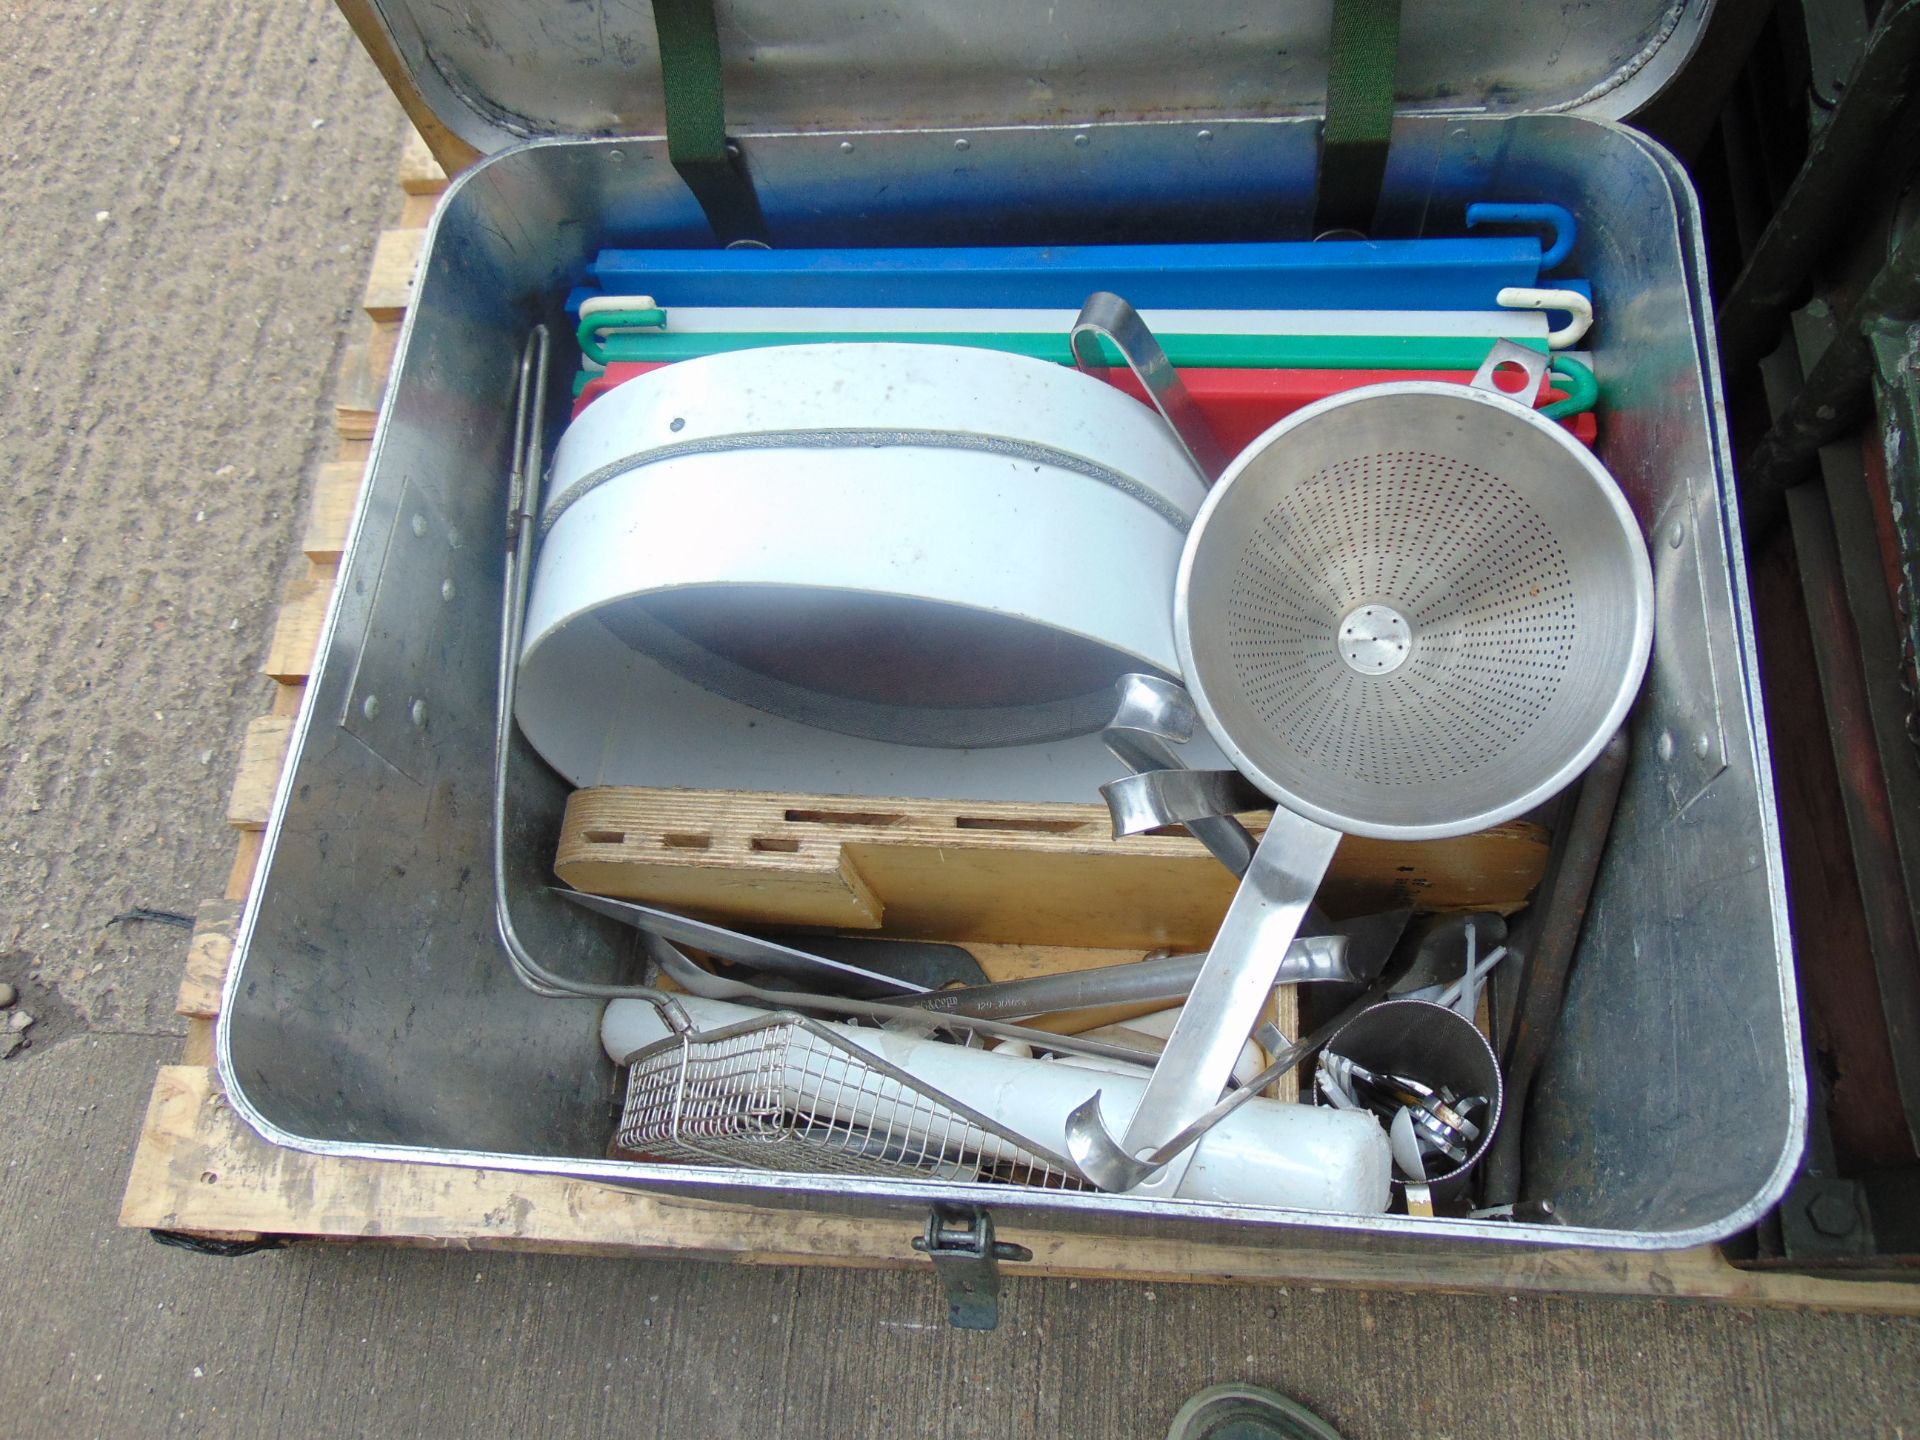 Cooking outfit field No 5 inc Cooker, Burners, Oven Equipment etc as shown from UK MoD - Image 3 of 4